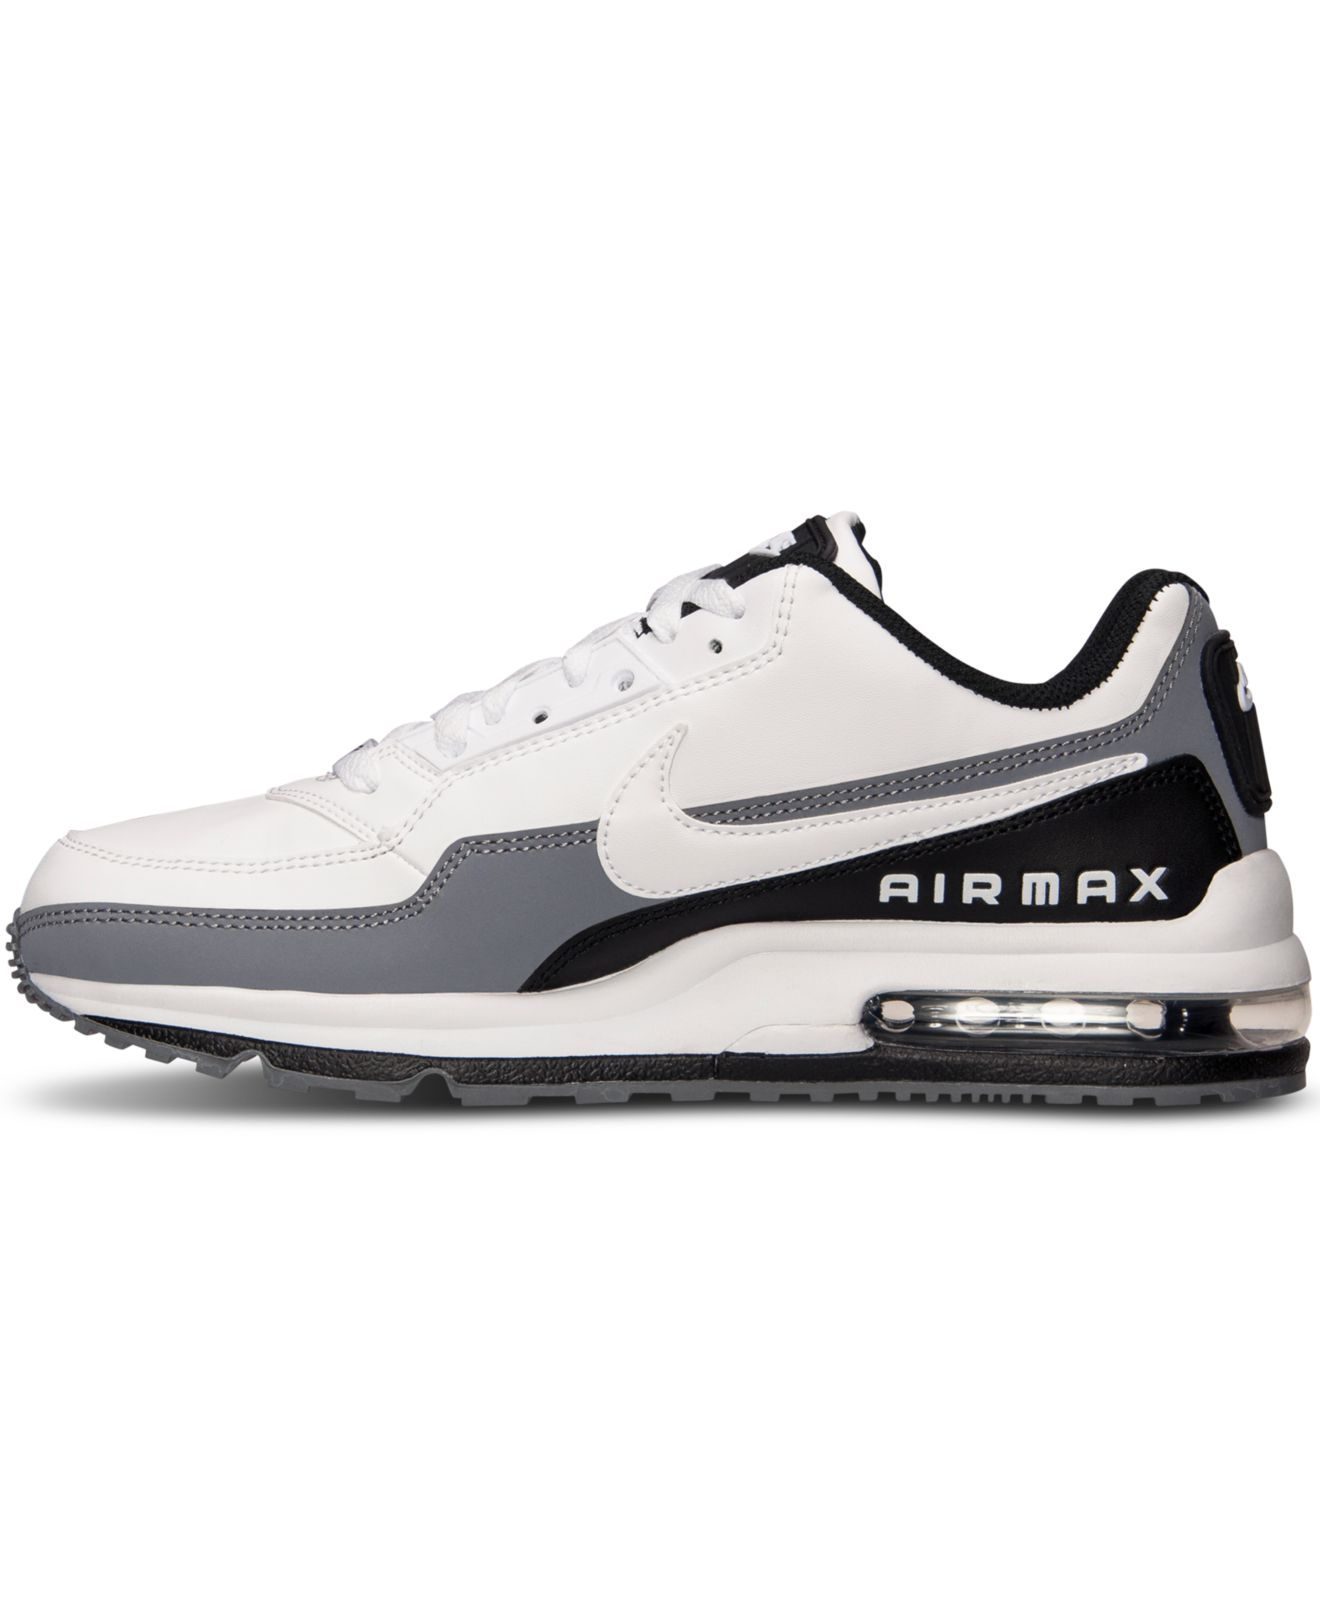 Lyst - Nike Men's Air Max Ltd 3 Running Sneakers From Finish Line in ...